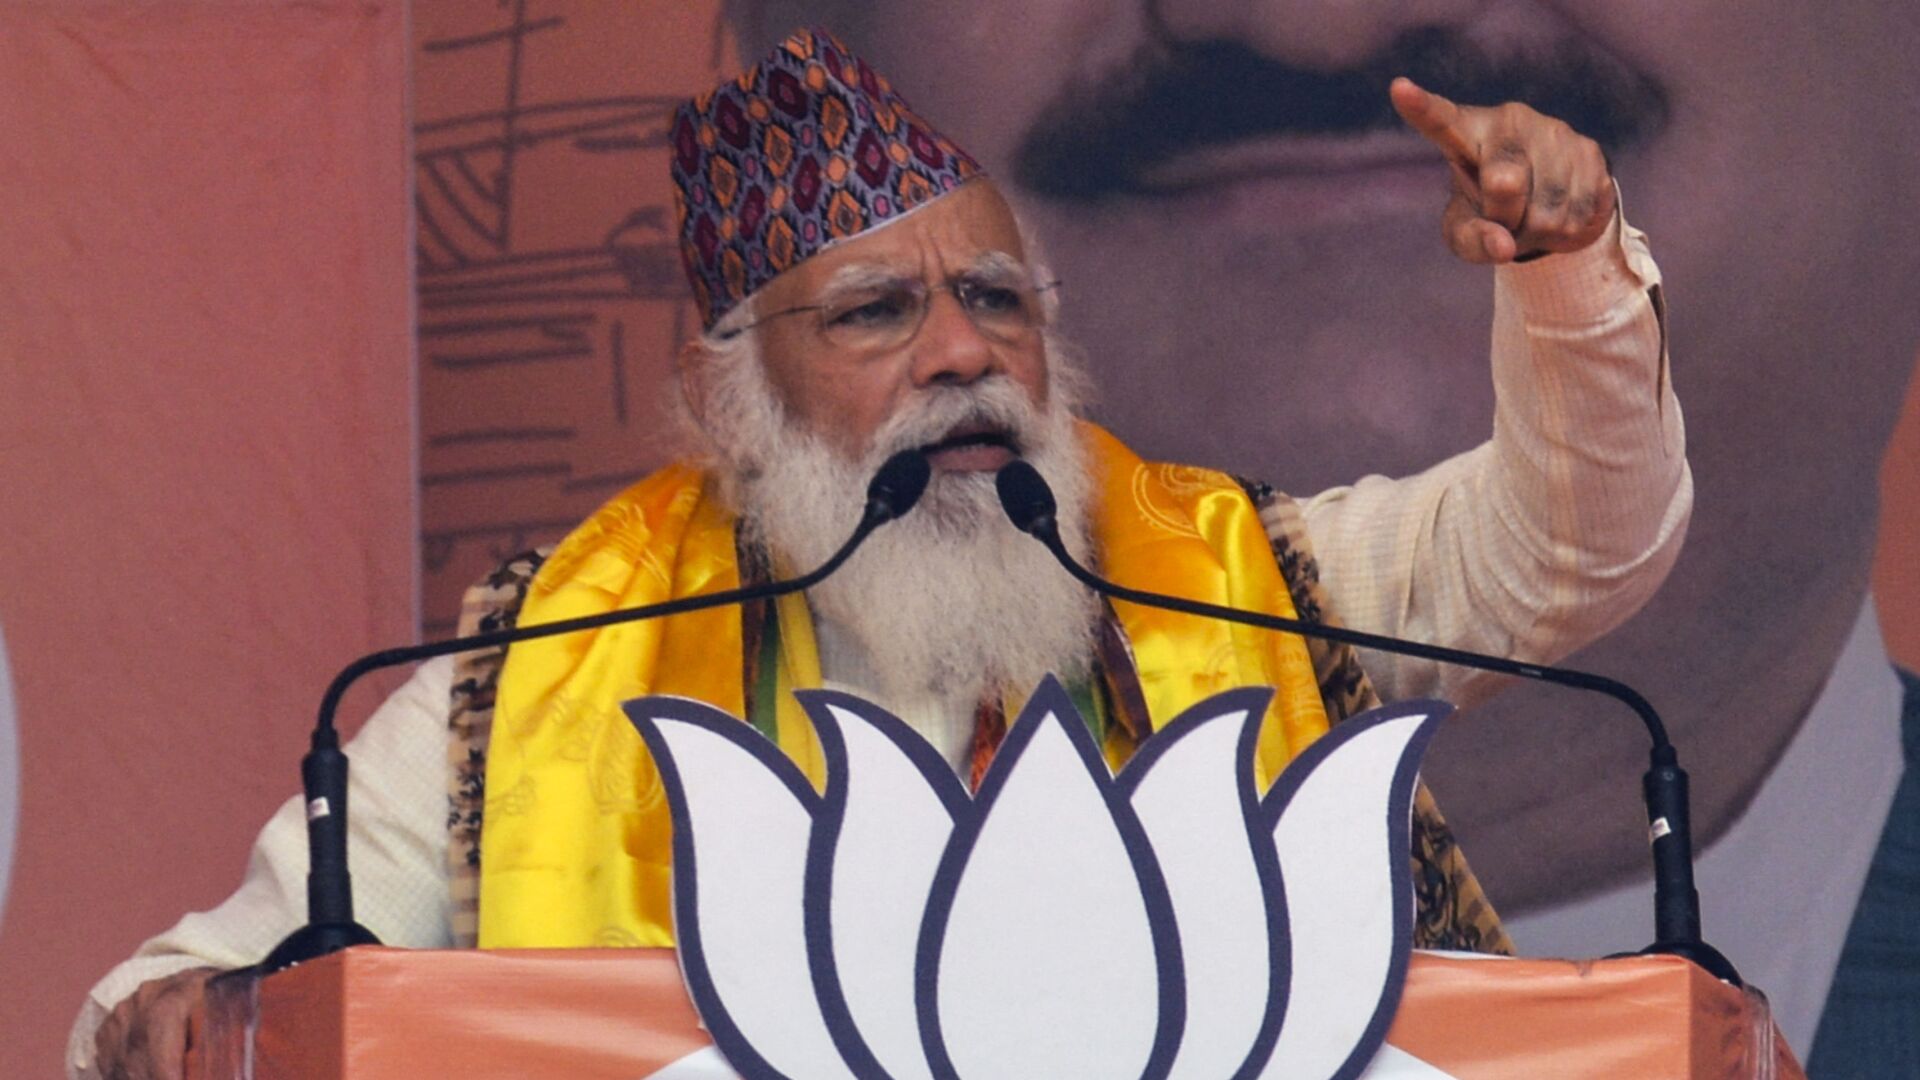 Indian Prime Minister Narendra Modi gestures as he speaks at a rally during the ongoing Phase 4 of West Bengal's assembly election, at Kawakhali on the outskirts of Siliguri on 10 April 2021 - Sputnik International, 1920, 27.08.2021